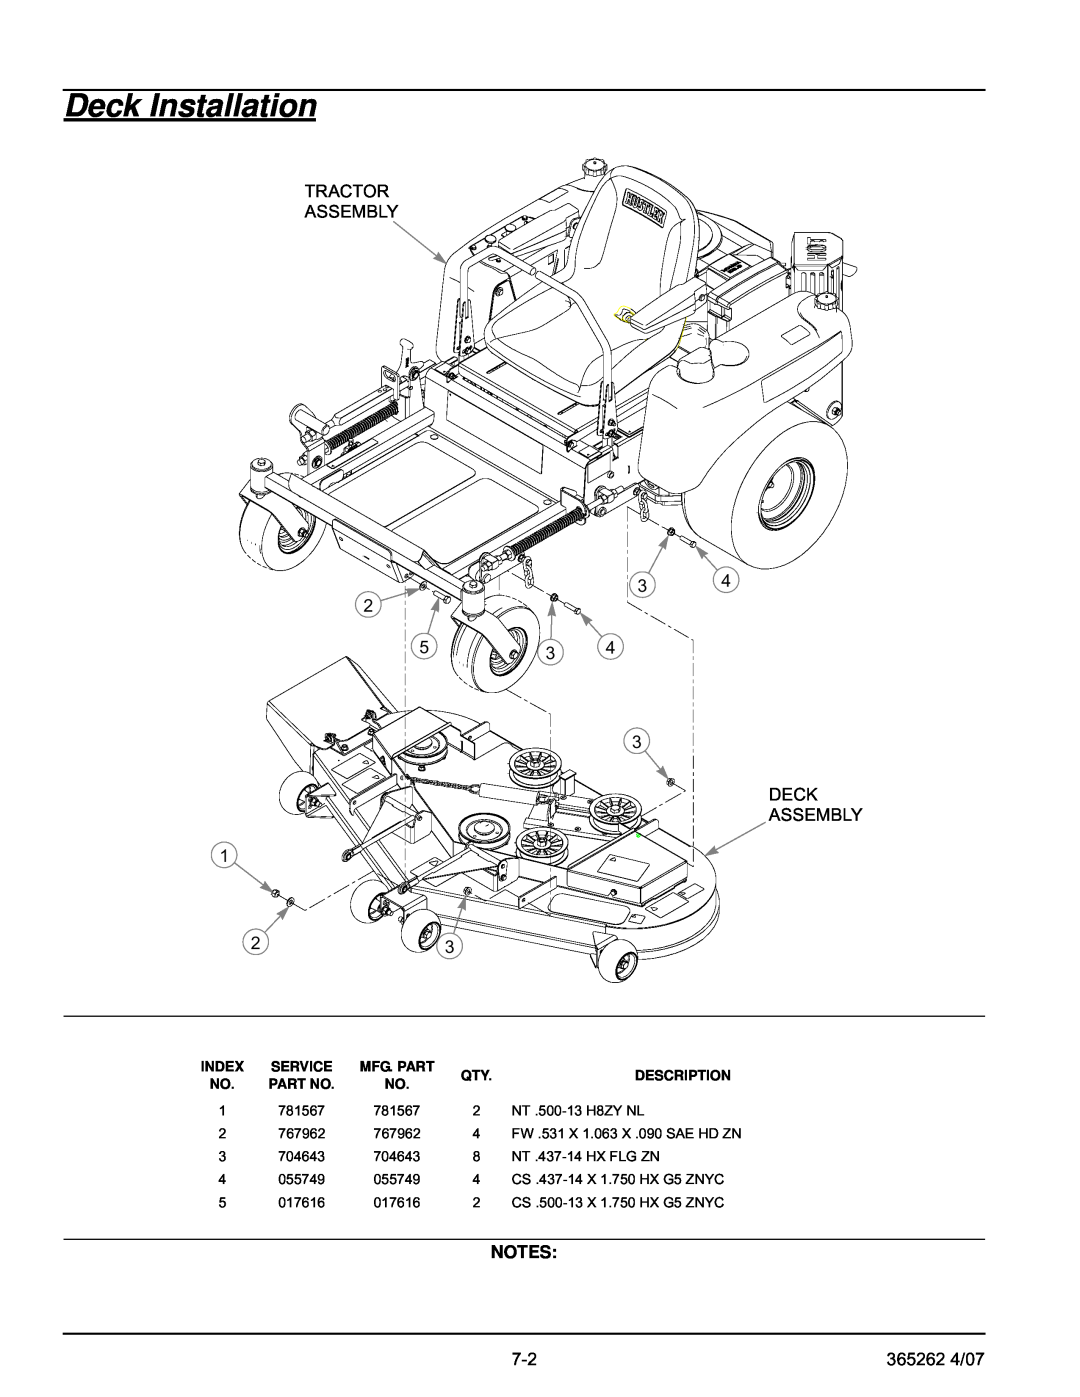 Hustler Turf Lawn Mower manual Deck Installation, Tractor Assembly, Deck Assembly, 365262 4/07, Index, Service, Description 